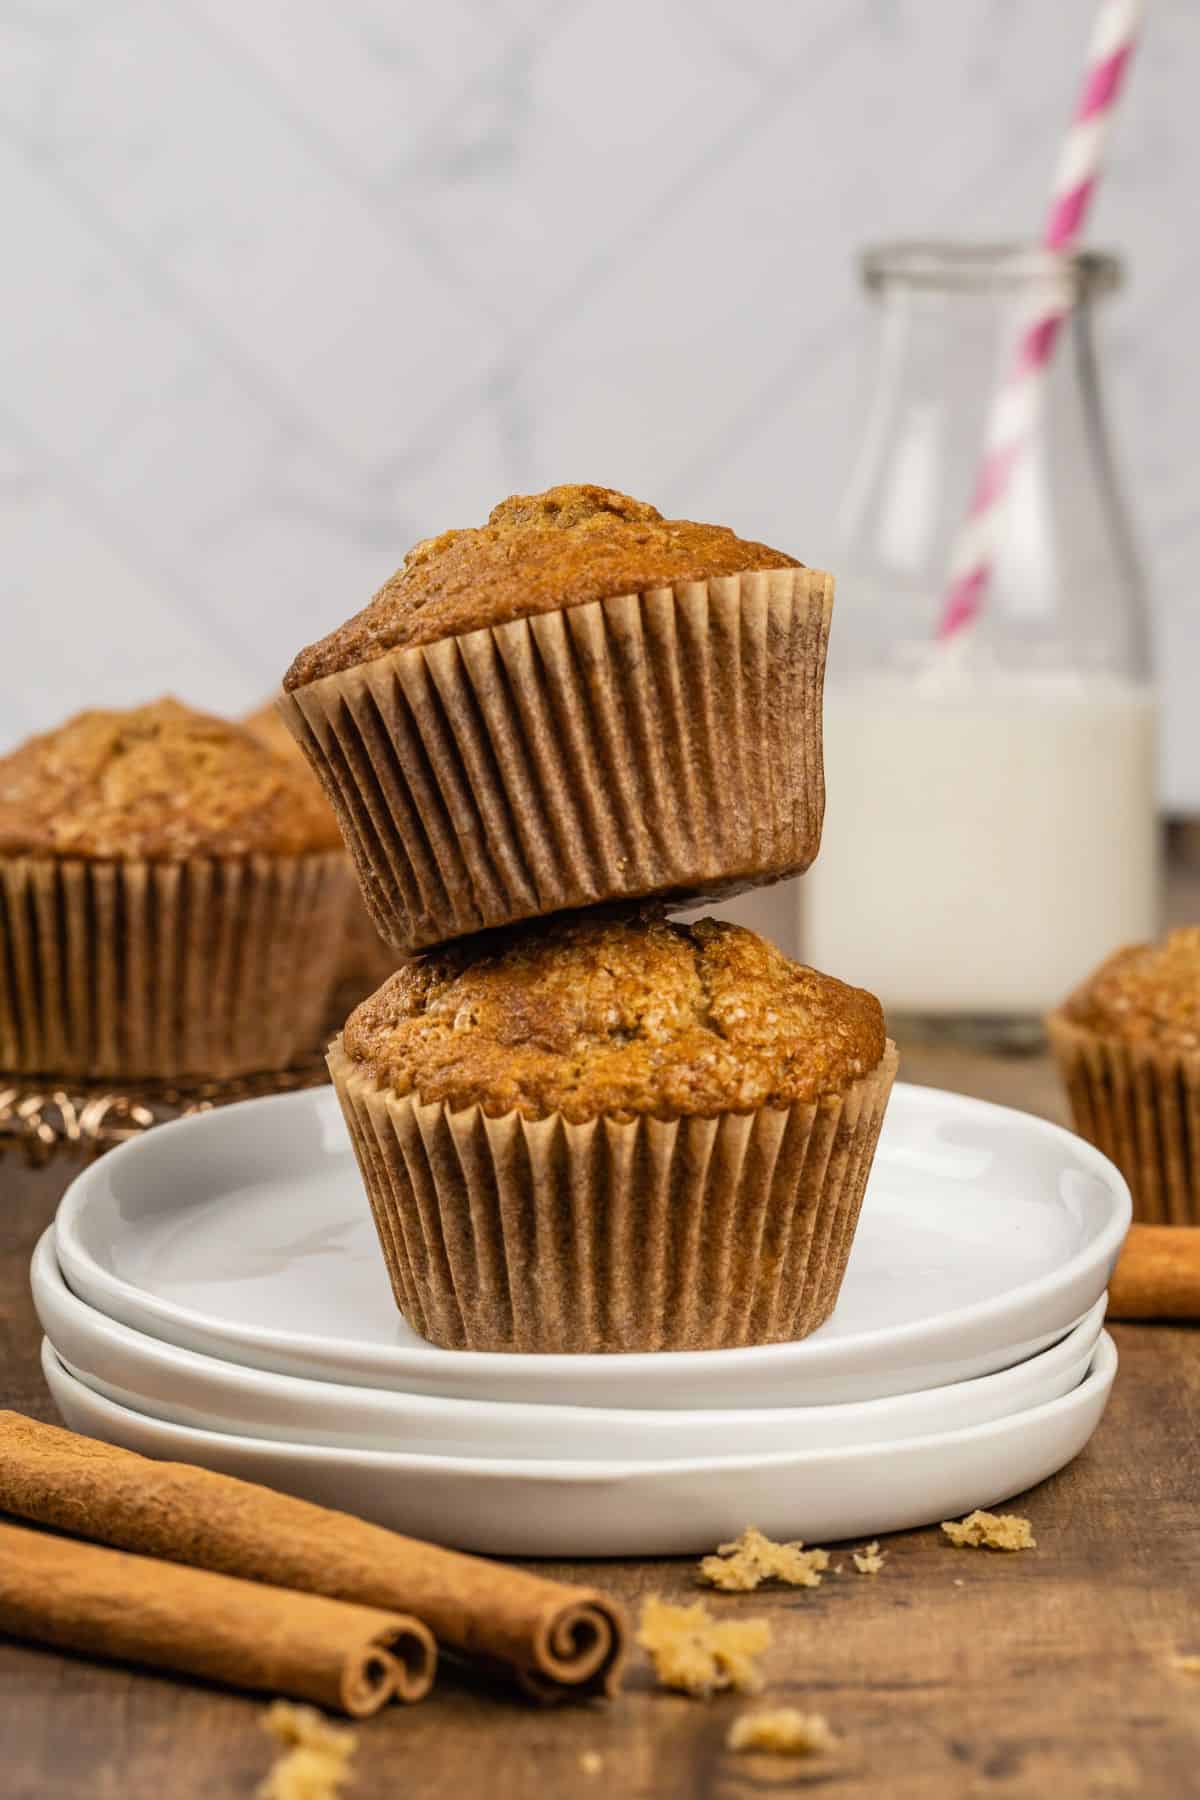 a stack of two gluten free banana muffins on top of a stack of small round white plates on the kitchen table with more muffins and a glass of milk with a pink straw blurred in the background